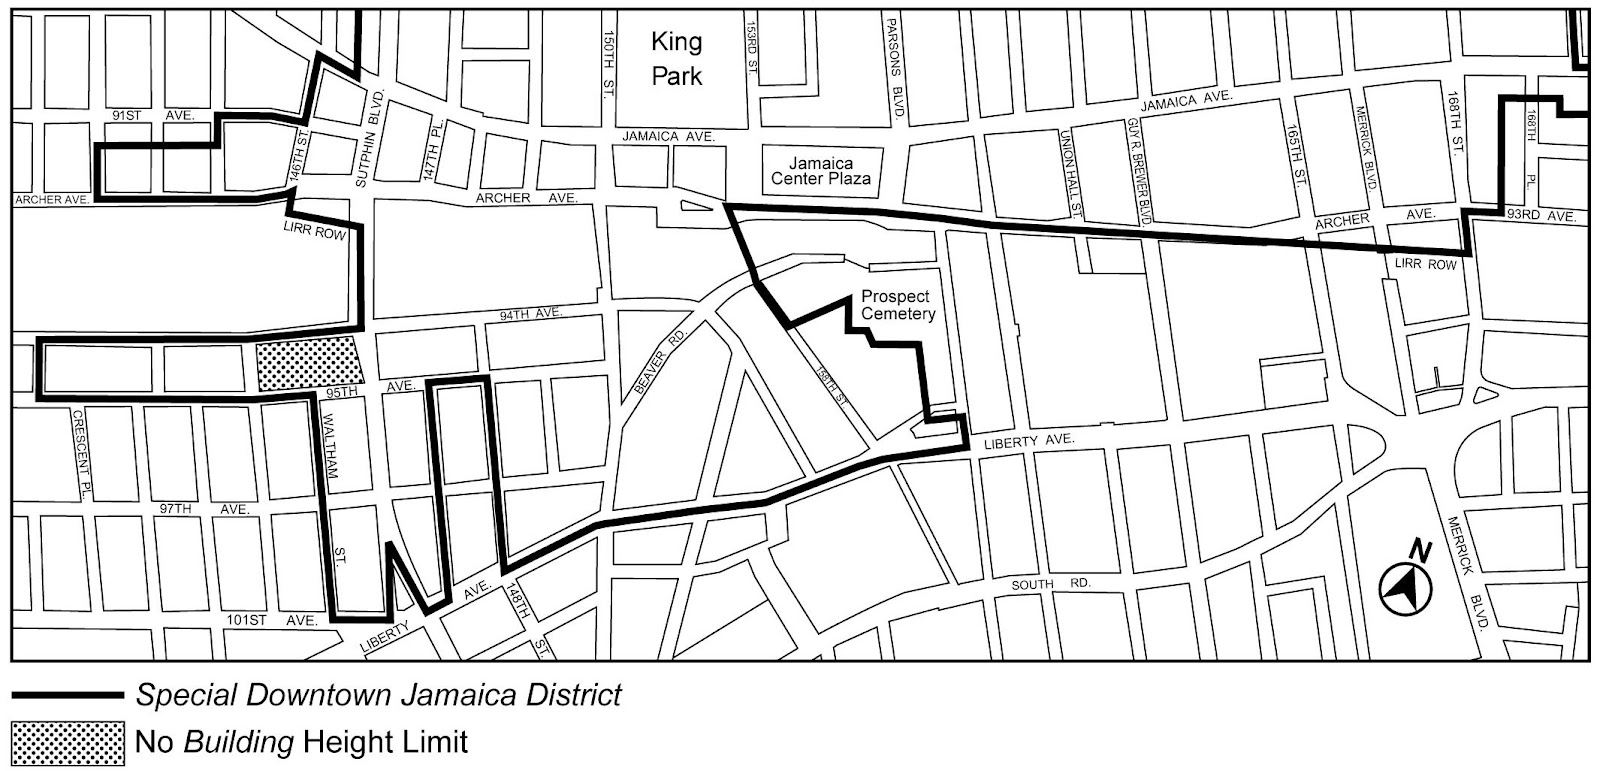 Zoning Resolutions Chapter 5: Special Downtown Jamaica District Appendix A.4